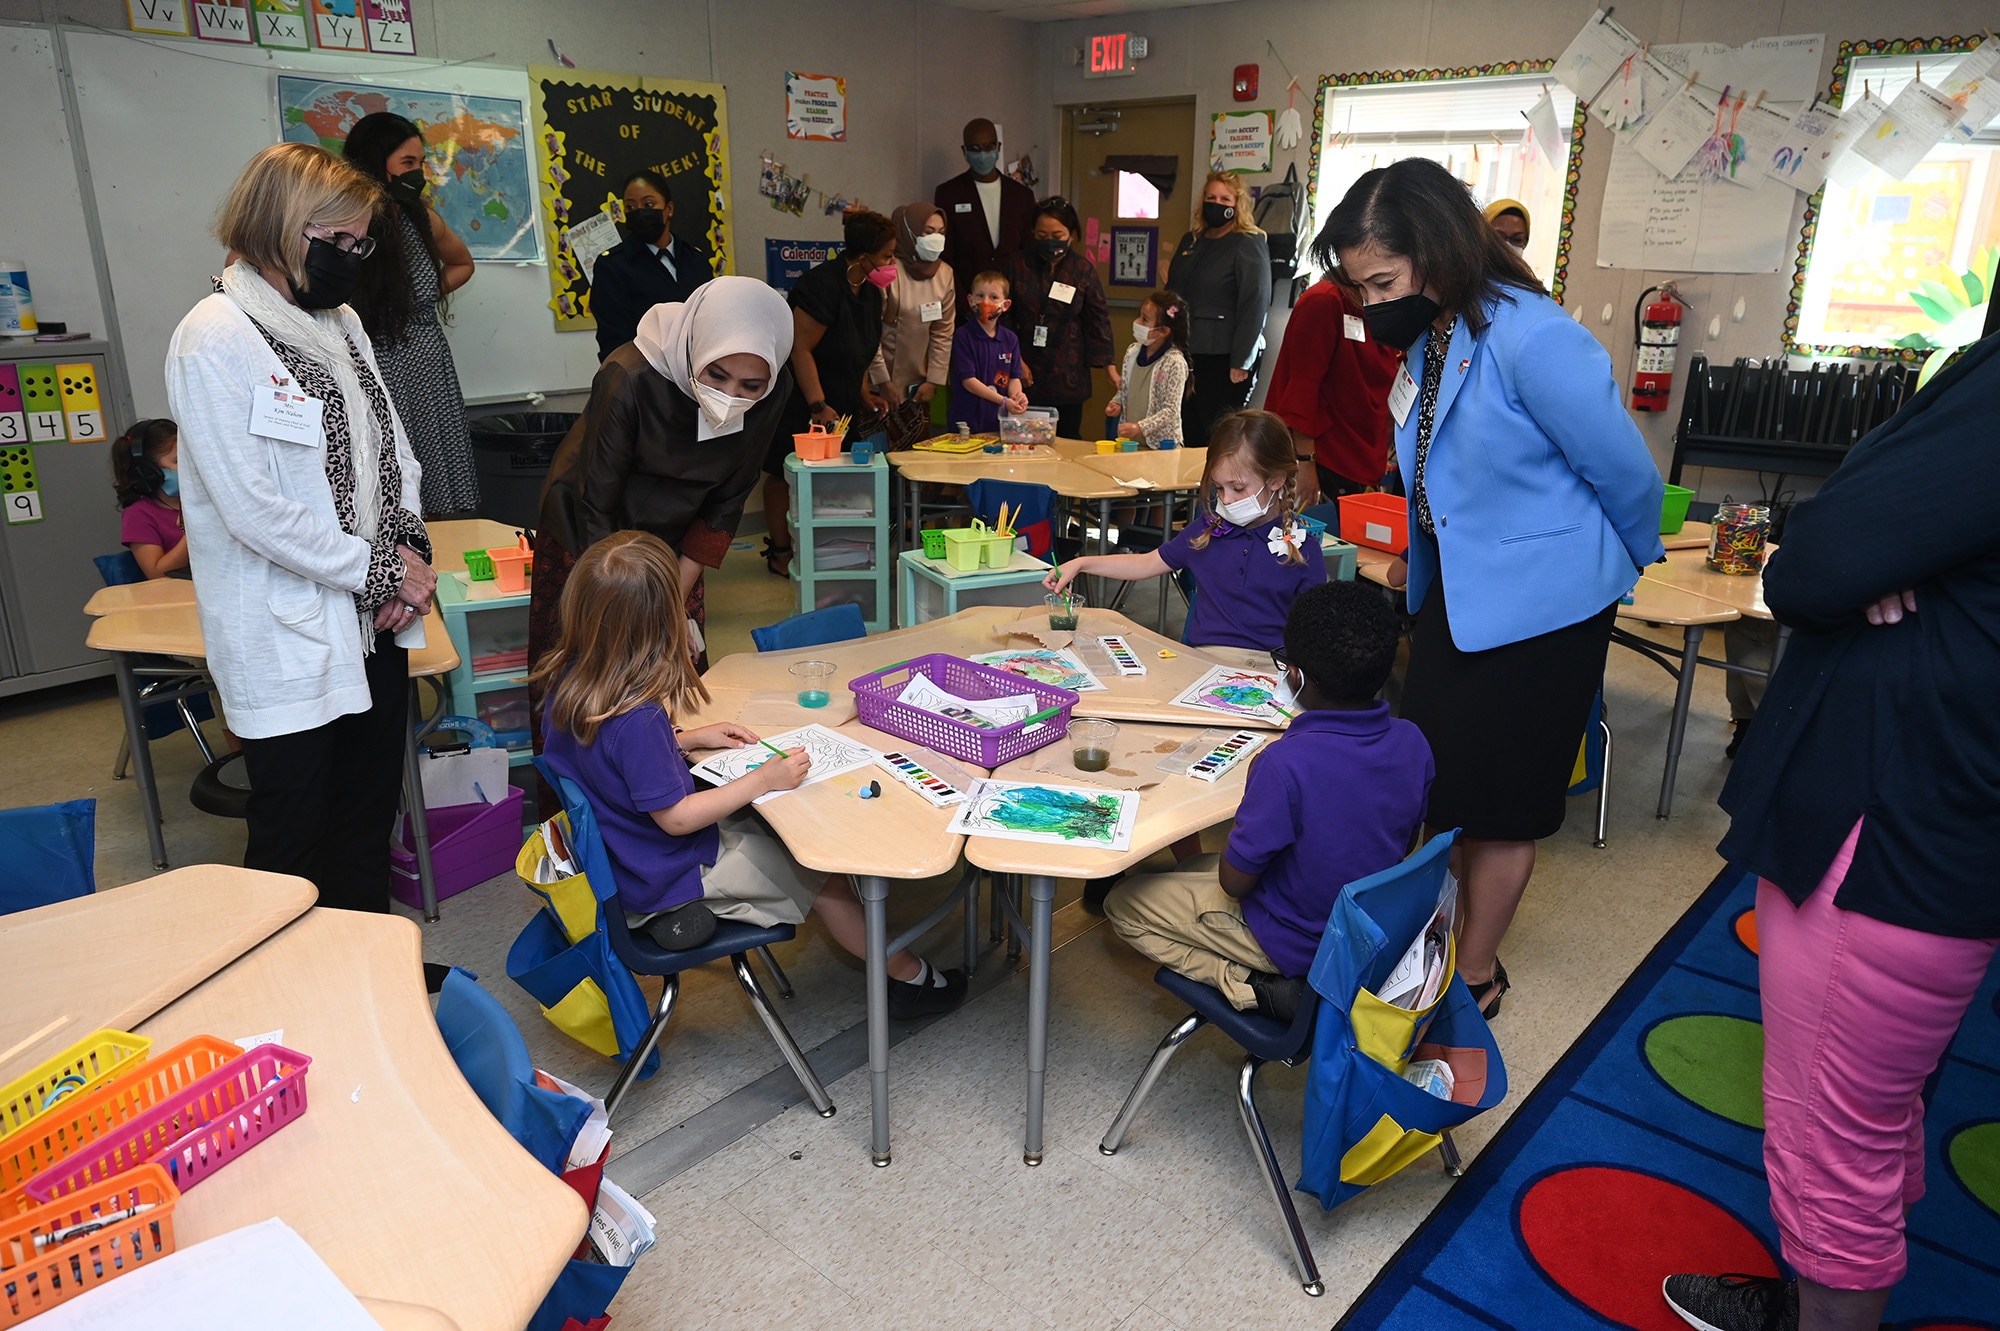 Wife of Air Force Chief of Staff Gen. Charles CQ Brown, Jr.,  Sharene Brown (right) tours a small school with visiting spouse of Indonesian  Air Chief Marshal Fadjar Prasetyo, Andarini Inong Putri (center) during a visit to Joint Base Anacostia-Bolling, Washington, D.C., May 19, 2022.  (U.S. Air Force photo by Andy Morataya)